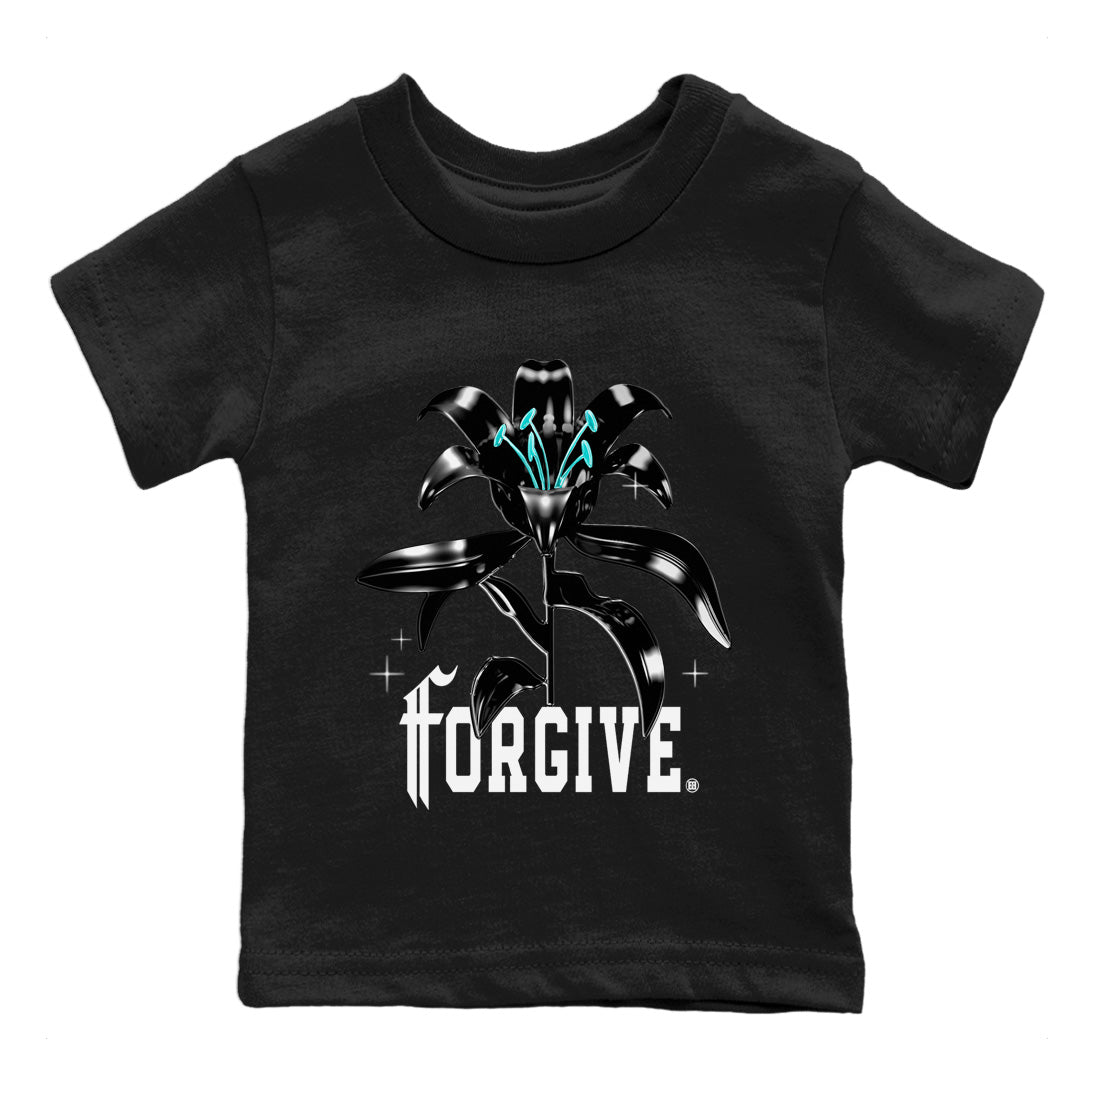 Air Force 1 Tiffany Forgive Baby and Kids Sneaker Tees Air Force 1 Low x Tiffany & Co Kids Sneaker Tees Washing and Care Tip